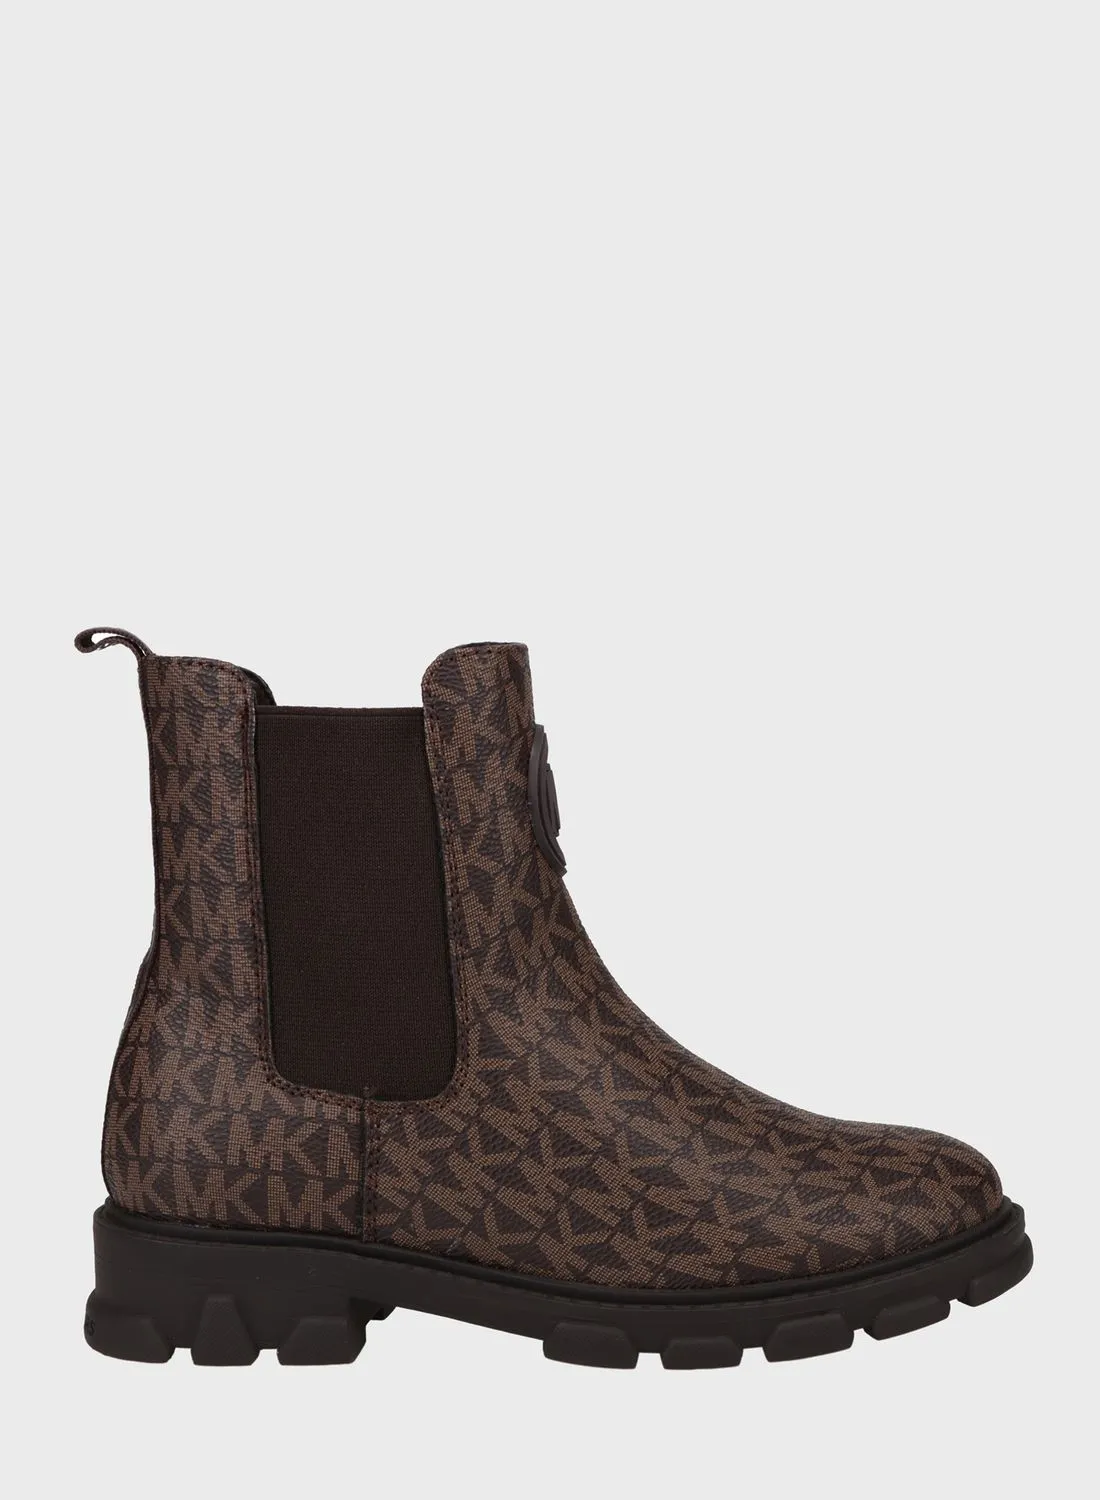 Michael Kors Youth Ridley Chelsea Boots